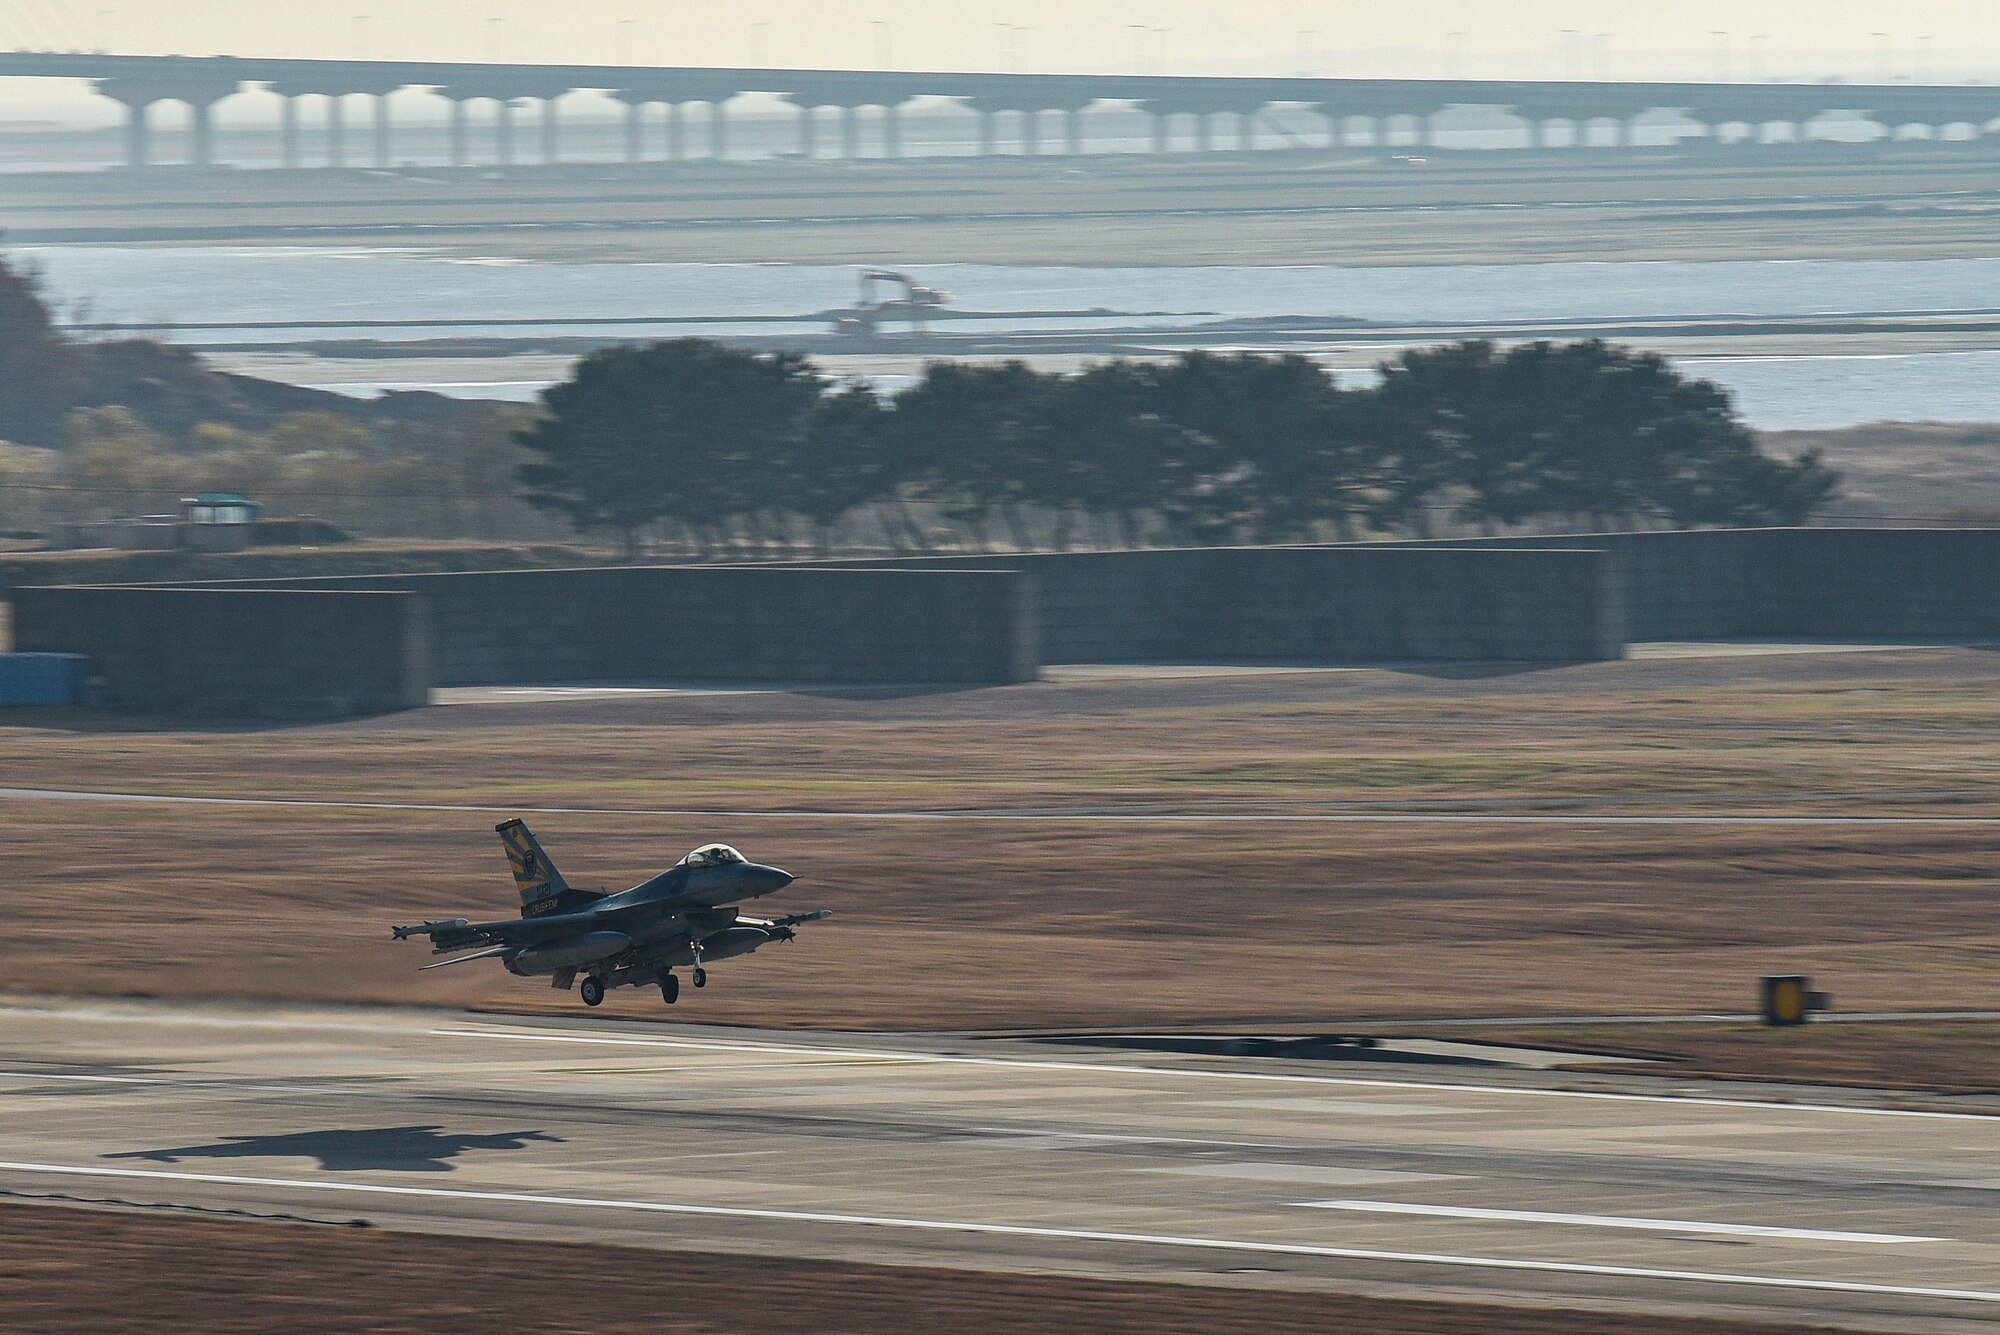 An F-16 Fighting Falcon assigned to the 80th Fighter Squadron takes off from the flightline at Kunsan Air Base, Republic of Korea, Nov. 18, 2022. The 80th Fighter Squadrons executes air combat operations in support of U.S. and ROK interests in the Pacific area of responsibility. (U.S. Air Force photo by Tech. Sgt. Timothy Dischinat)